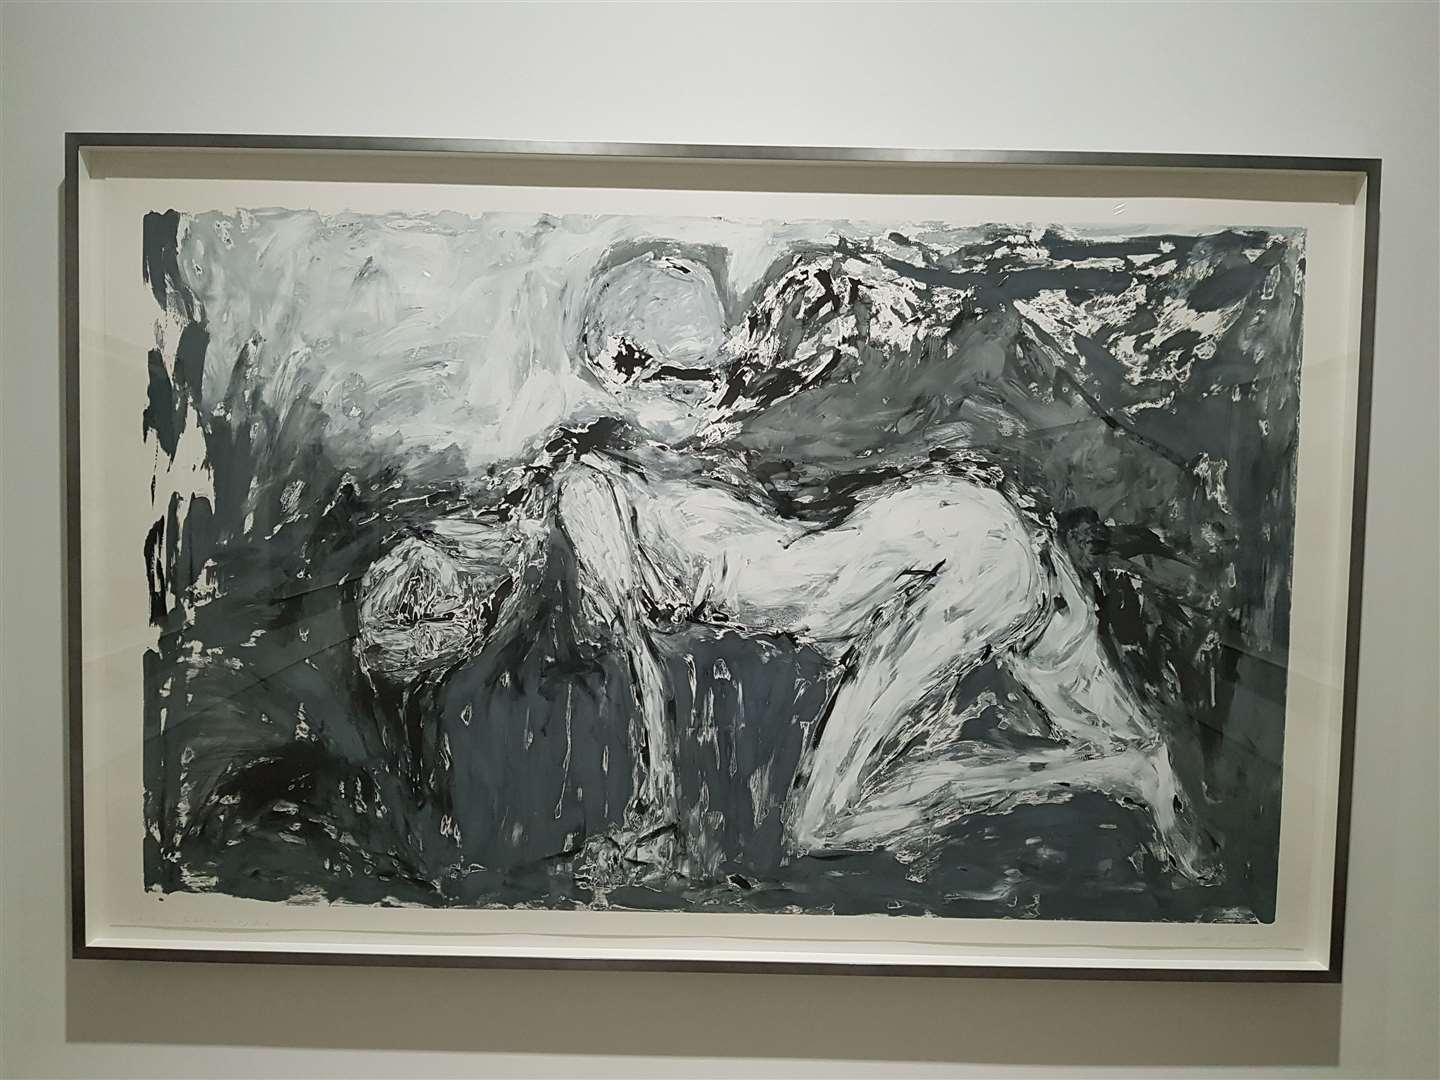 Like the Moon You Rolled Across My Back, by Tracey Emin, is a powerful and disturbing image